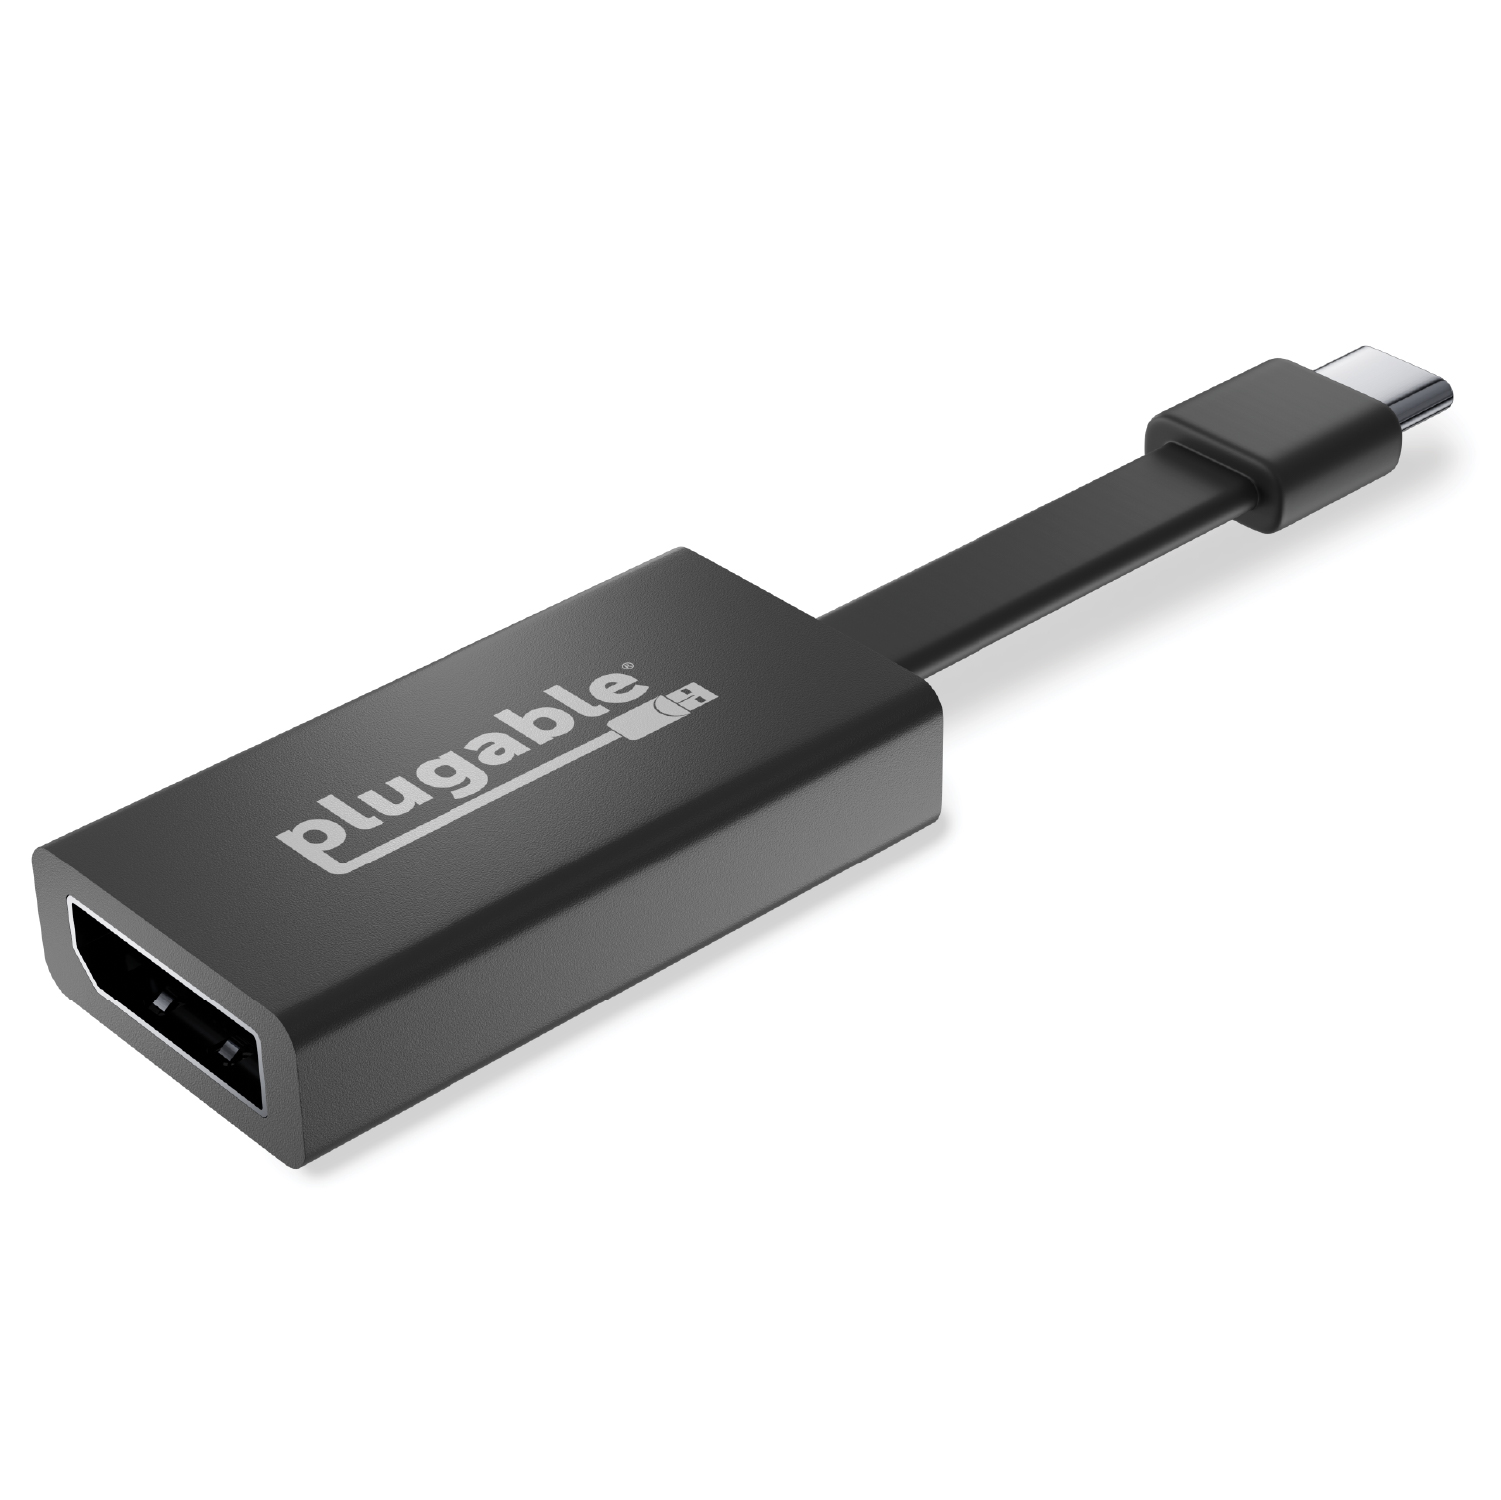 Plugable USB C to DisplayPort Adapter 4K 60Hz, Thunderbolt 3 to DisplayPort Adapter Compatible with MacBook Pro, Windows, Chromebooks, iPad Pro, Dell XPS, and more - image 1 of 5